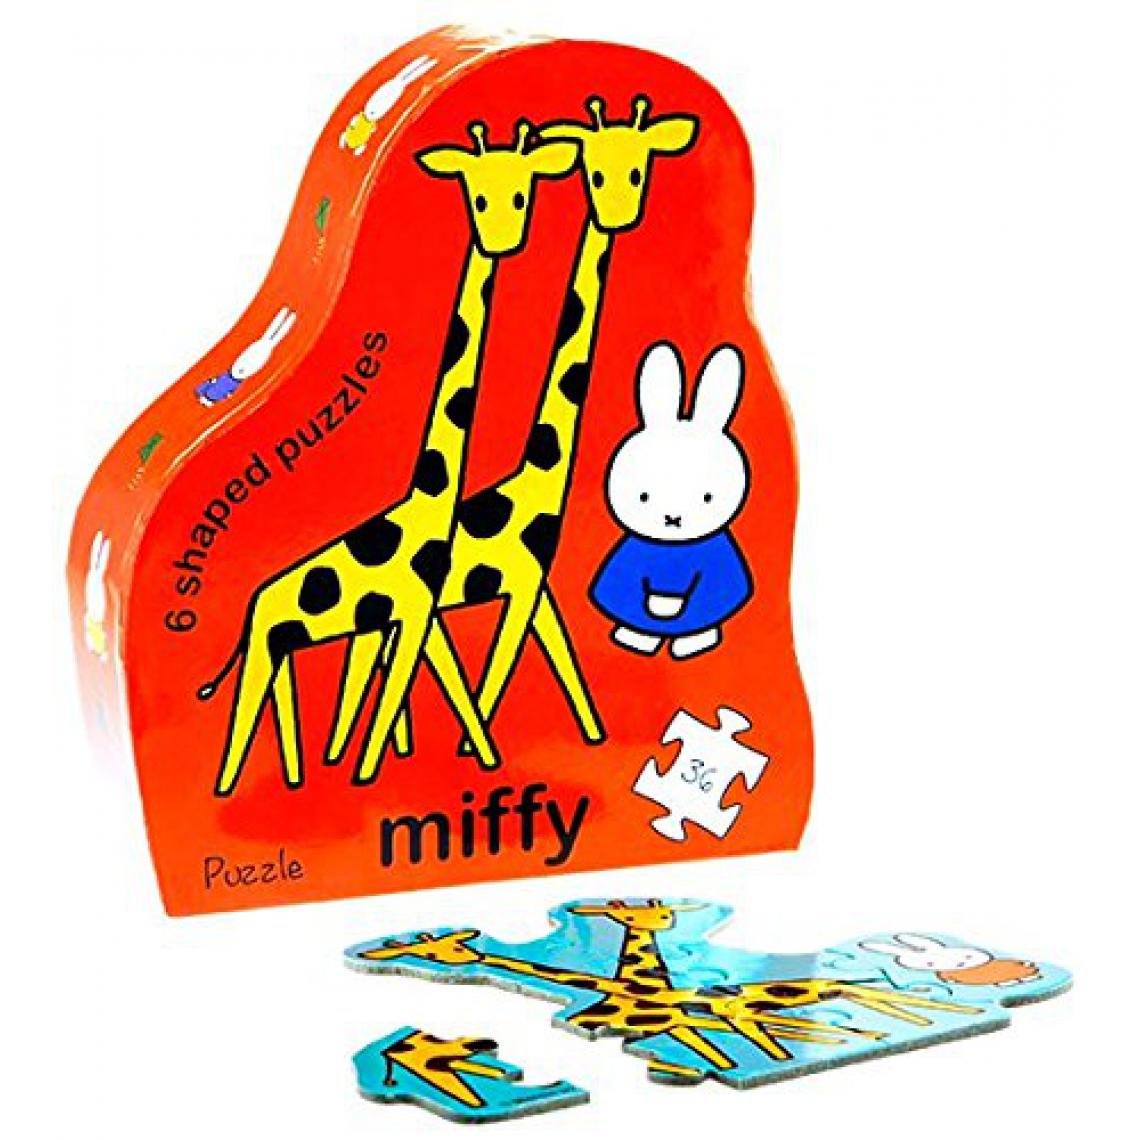 Inconnu - Barbotoys Miffy - 9922 - Puzzle - Animaux